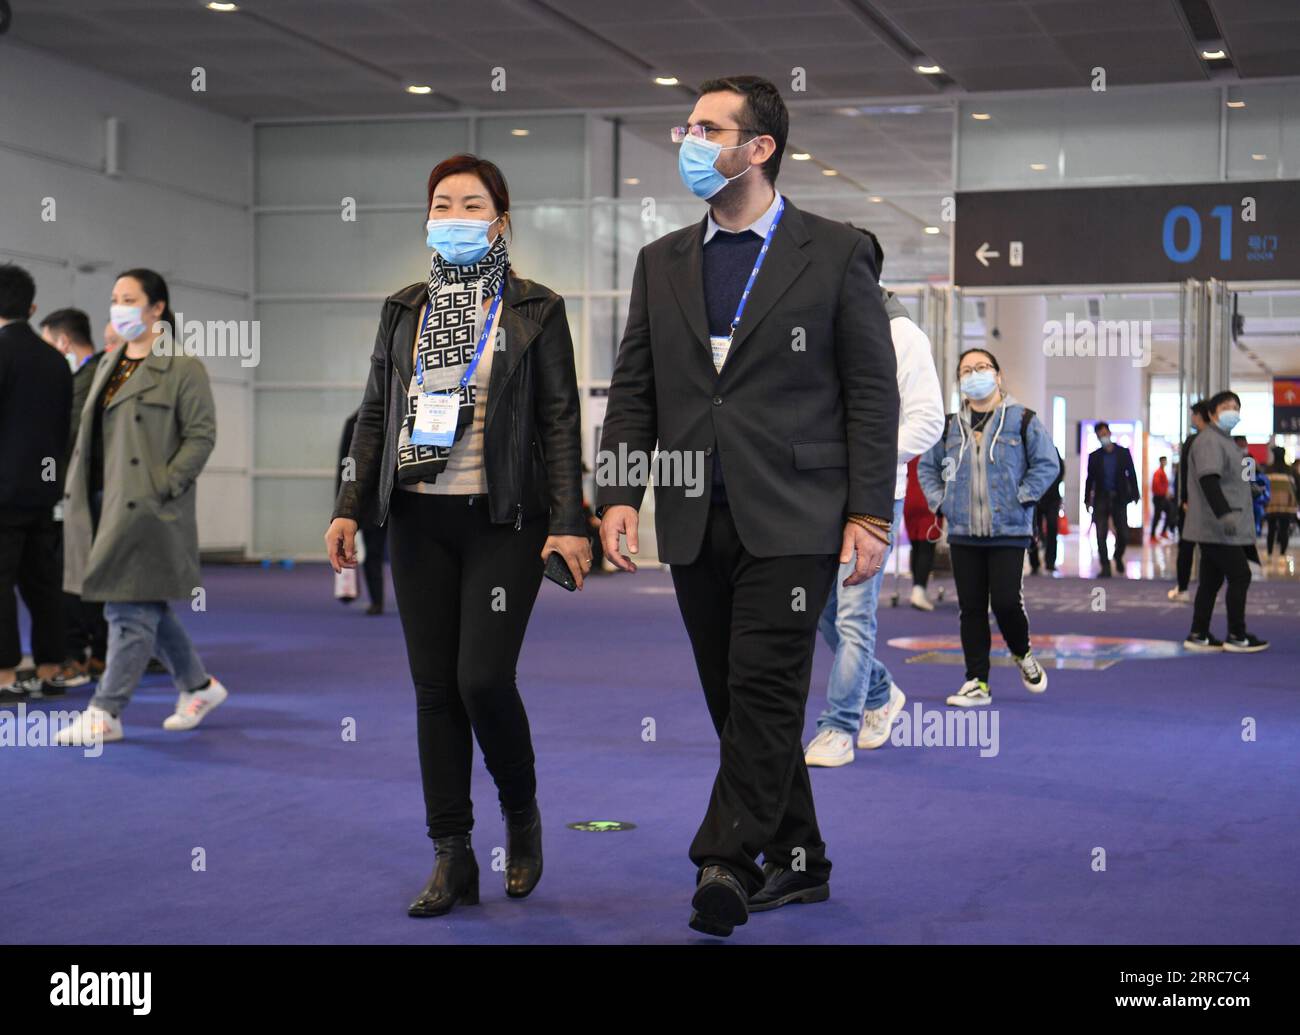 211022 -- TIANJIN, Oct. 22, 2021 -- Italian wine merchant Candido Mormile walks with his wife during the 105th China Food & Drinks Fair in the national convention and exhibition center in Tianjin, north China, Oct. 20, 2021. Candido Mormile, an owner and founder of a wineries association from Italy, Lunanera Italian winery association, gets a good result and meets new cooperations in the 105th China Food & Drinks Fair. The fair kicked off on Tuesday in Tianjin Municipality, attracting more than 3,000 exhibitors.  CHINA-TIANJIN-ITALIAN WINE MERCHANT CN SunxFanyue PUBLICATIONxNOTxINxCHN Stock Photo